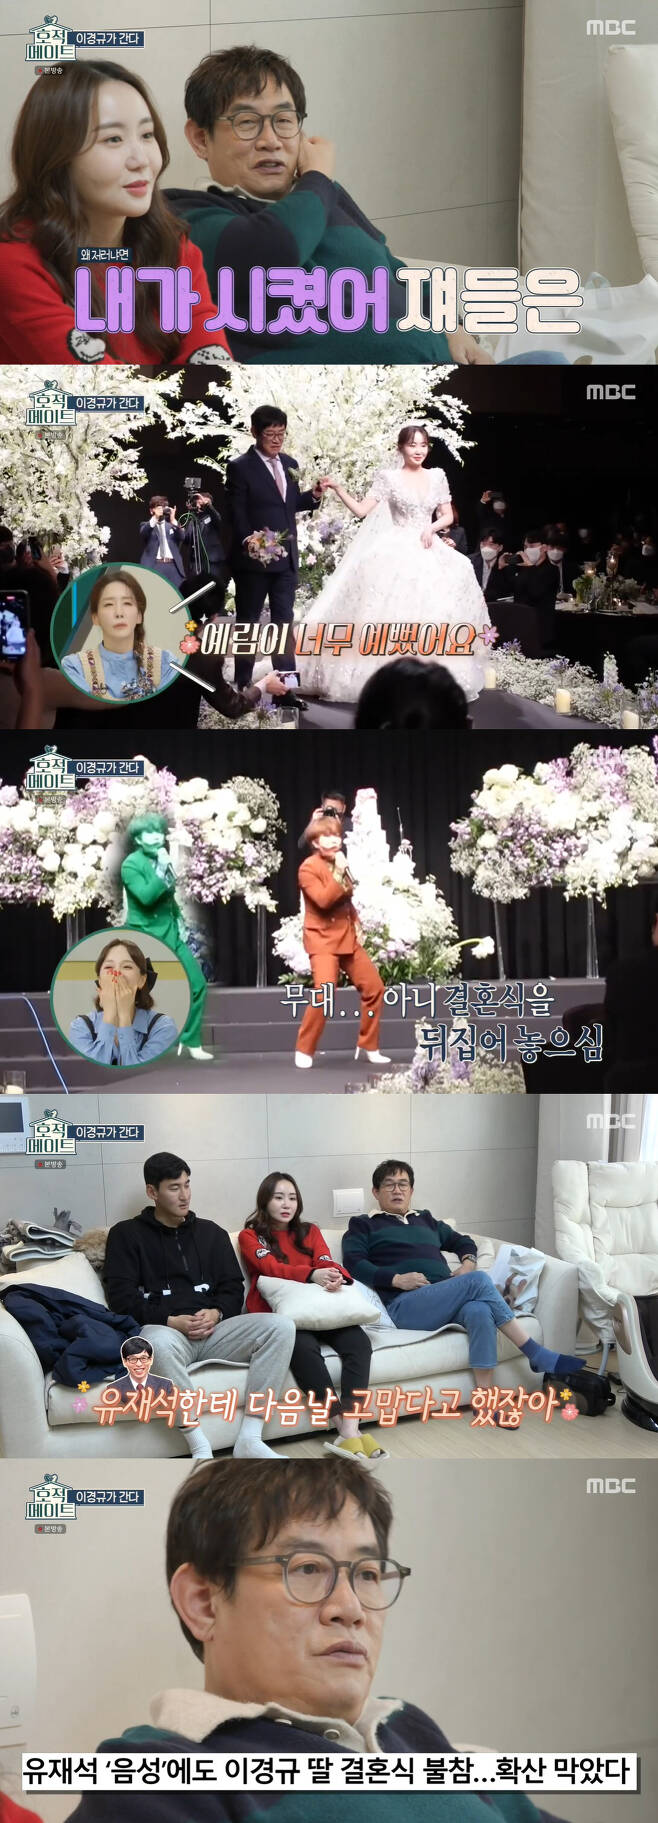 Comedian Lee Kyung-kyu thanked his junior Yoo Jae-Suk for his support.In the MBC entertainment program Family register mate broadcasted on the 8th, Lee Kyung-kyu visited his daughter Lee Ye Rims honeymoon home.Lee Ye Rim, who signed a 100-year contract with Kim Young-chan, a soccer player from Gyeongnam FC last December, attracted attention with modern and clean interior in a spacious space.Lee Kyung-kyu, who is rather blunt, said rather stiffly, Oh, the prospect is good, even though he was the first to visit his honeymoon home.The room, the dress room, etc. were also quickly hooked and greeted the dog more happily. Lee Ye Rim laughed at the joke saying, You came to see the runge?Lee Kyung-kyu sat alongside Lee Ye Rim and Kim Young-chan and watched the wedding video of the two, who said, I thought Yerim would cry at the wedding, but it came in clear.I thought I was going to cry too, but I was nervous about the heavy dress, so (I wasnt crying), Lee Ye Rim said.I didnt know that moment would come, Lee Kyung-kyu said, watching the moment he walked through Virgin Road holding Lee Ye Rims hand.As for Jo Hye-ryuns celebration, he said, I suddenly said that I would celebrate the day before, so I did not say Anaana.Jo Hye-ryun in the video called his hit song Anaana with a smile.Lee Kyung-kyu also said, I called you the next day and thank you. I heard the voice from the Corona 19 test, but it was said. Yoo Jae-suk also mentioned.Yoo Jae-Suk was negative at the time of the gene amplification (PCR) test, but he refrained from activities as much as possible, asked Lee Kyung-kyu for his understanding and did not attend Lee Ye Rims wedding.Lee Kyung-kyu, who was impressed, suddenly asked Lee Ye Rim, So I told you not to come, did you send a congratulatory fee?Lee Ye Rim nodded, I sent you thick, and Kim Young-chan admired Yoo Jae-Suk as a great person.